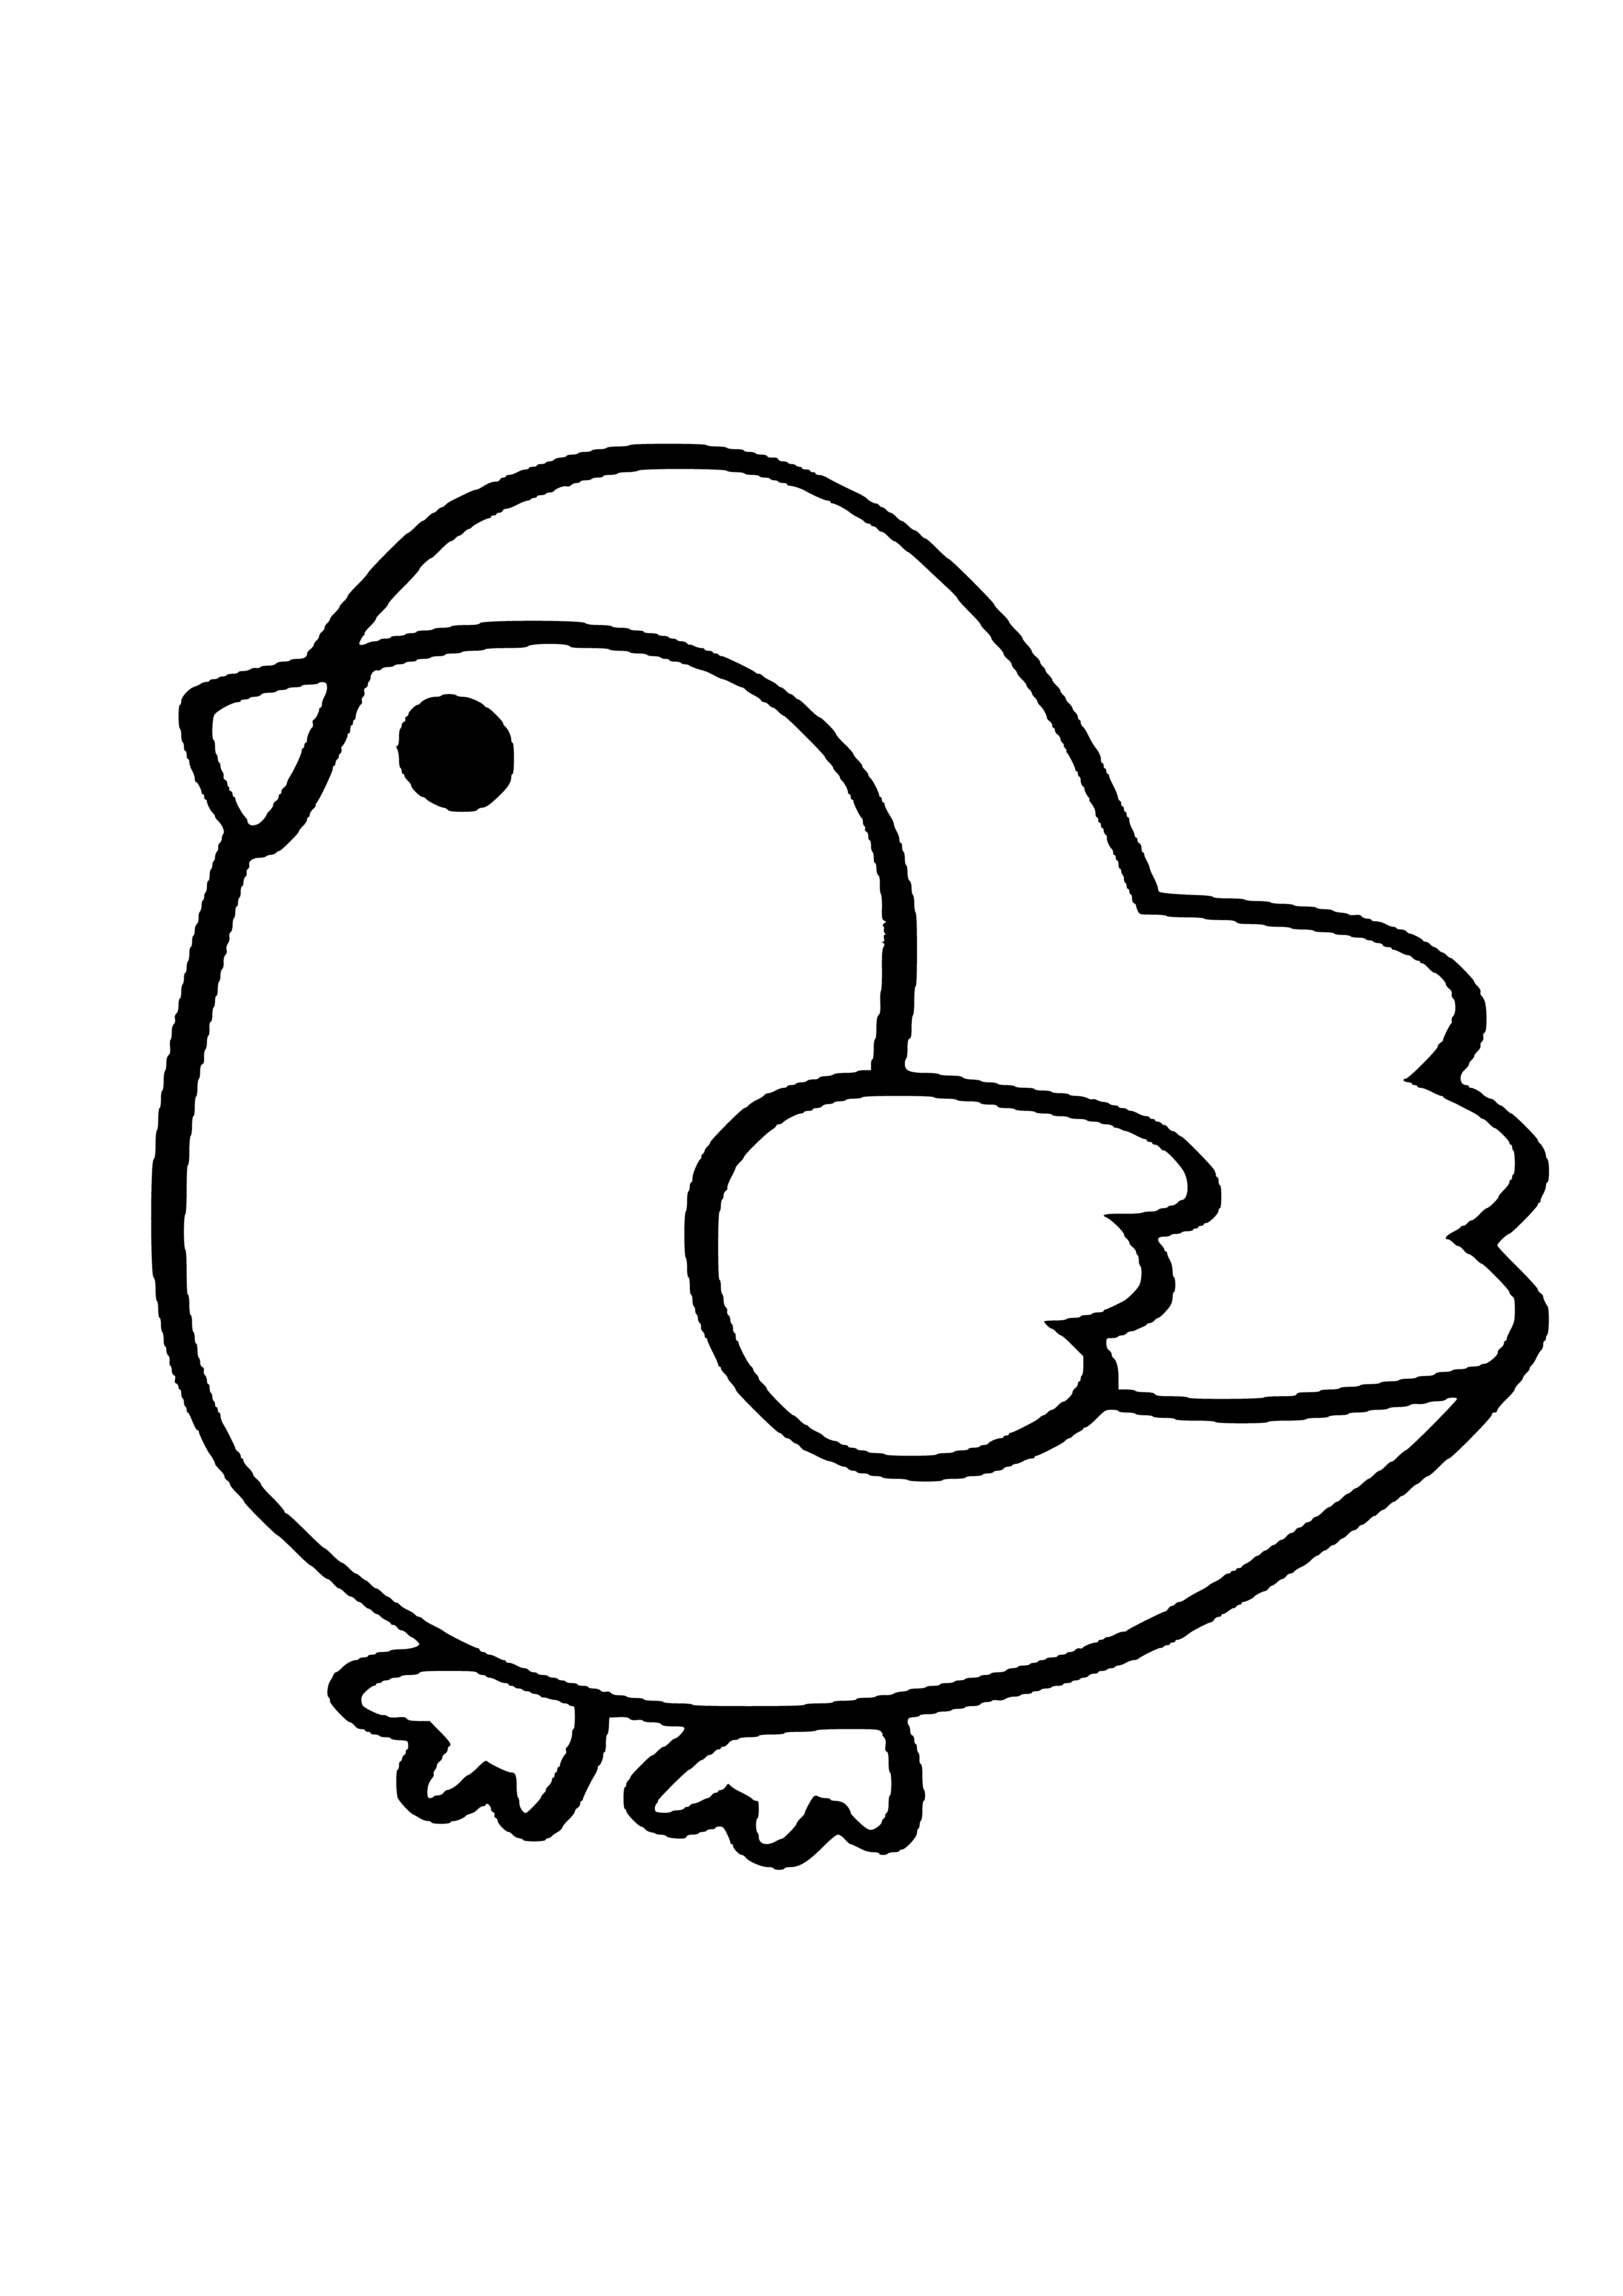 Little bird coloring page